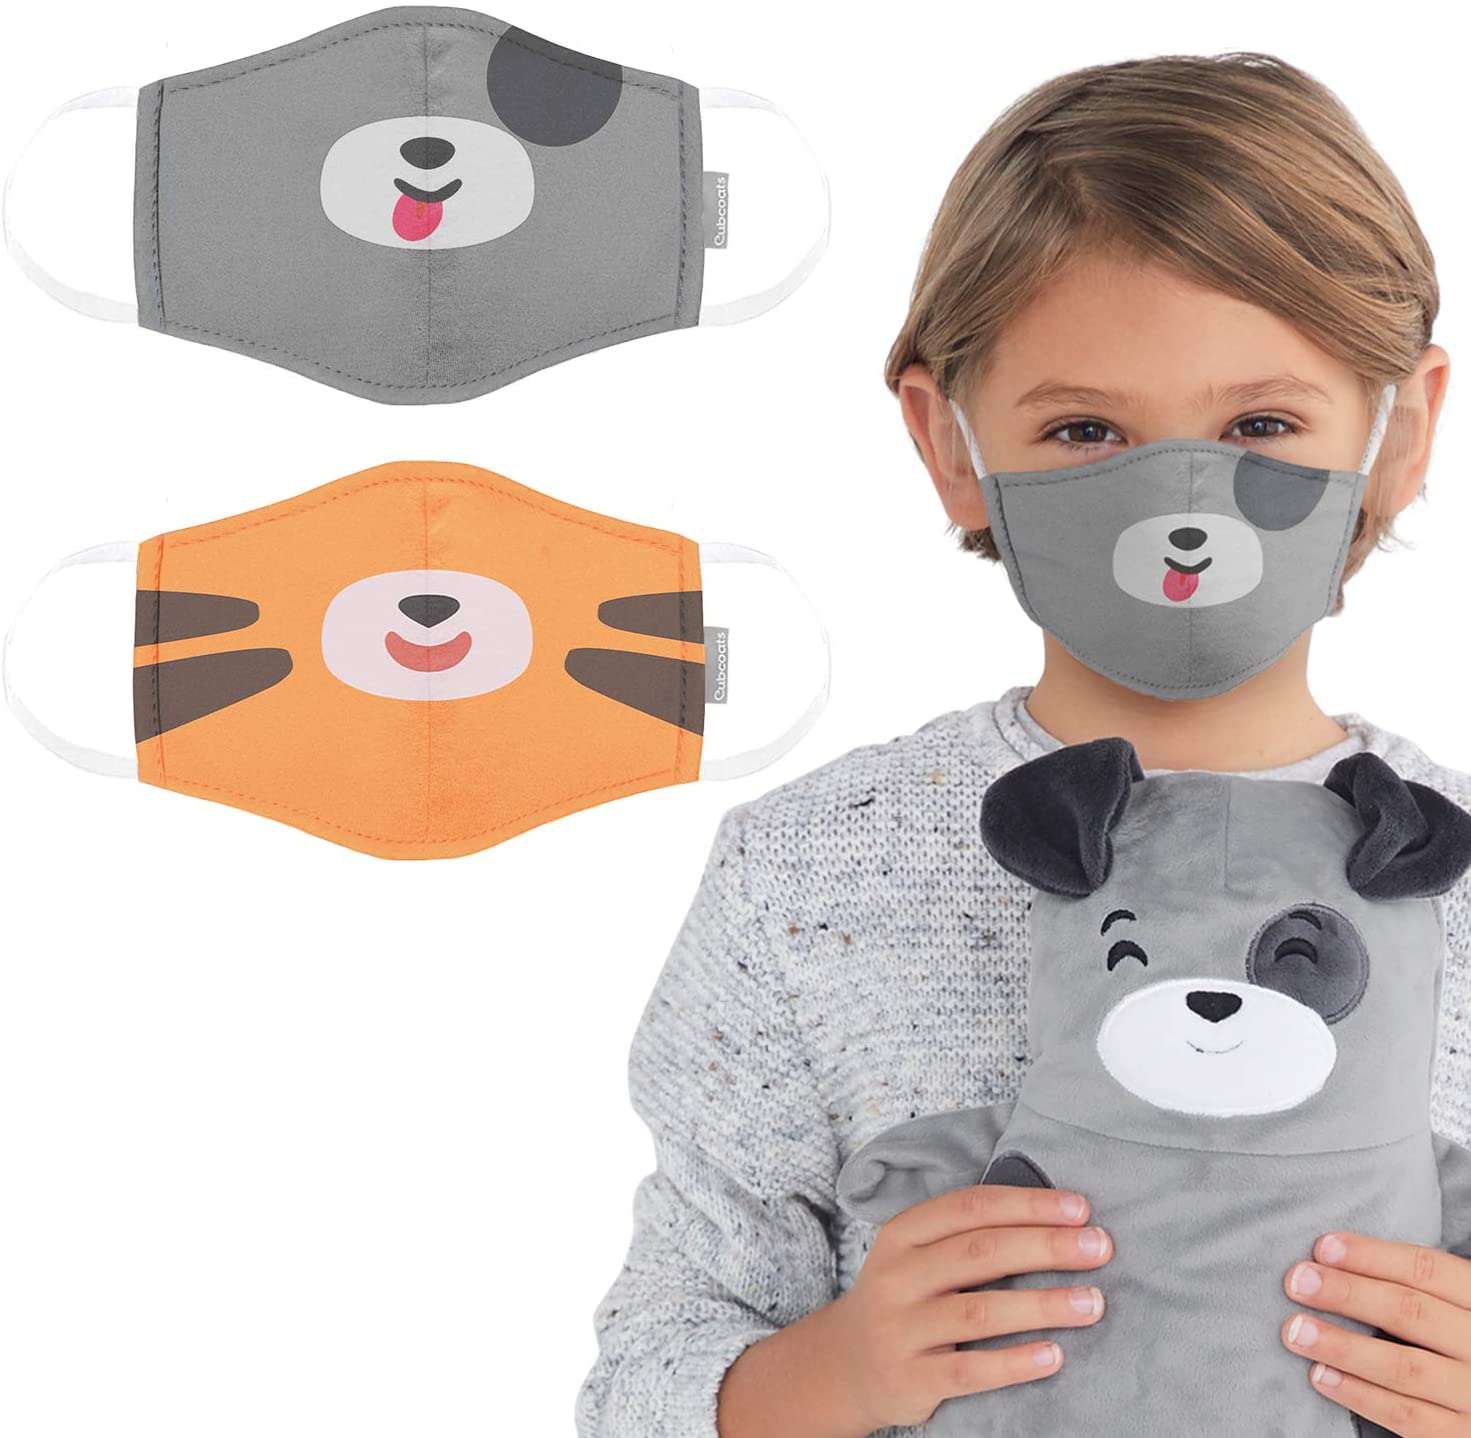 Face Masks For Kids On Sale From Cubcoats At Amazon